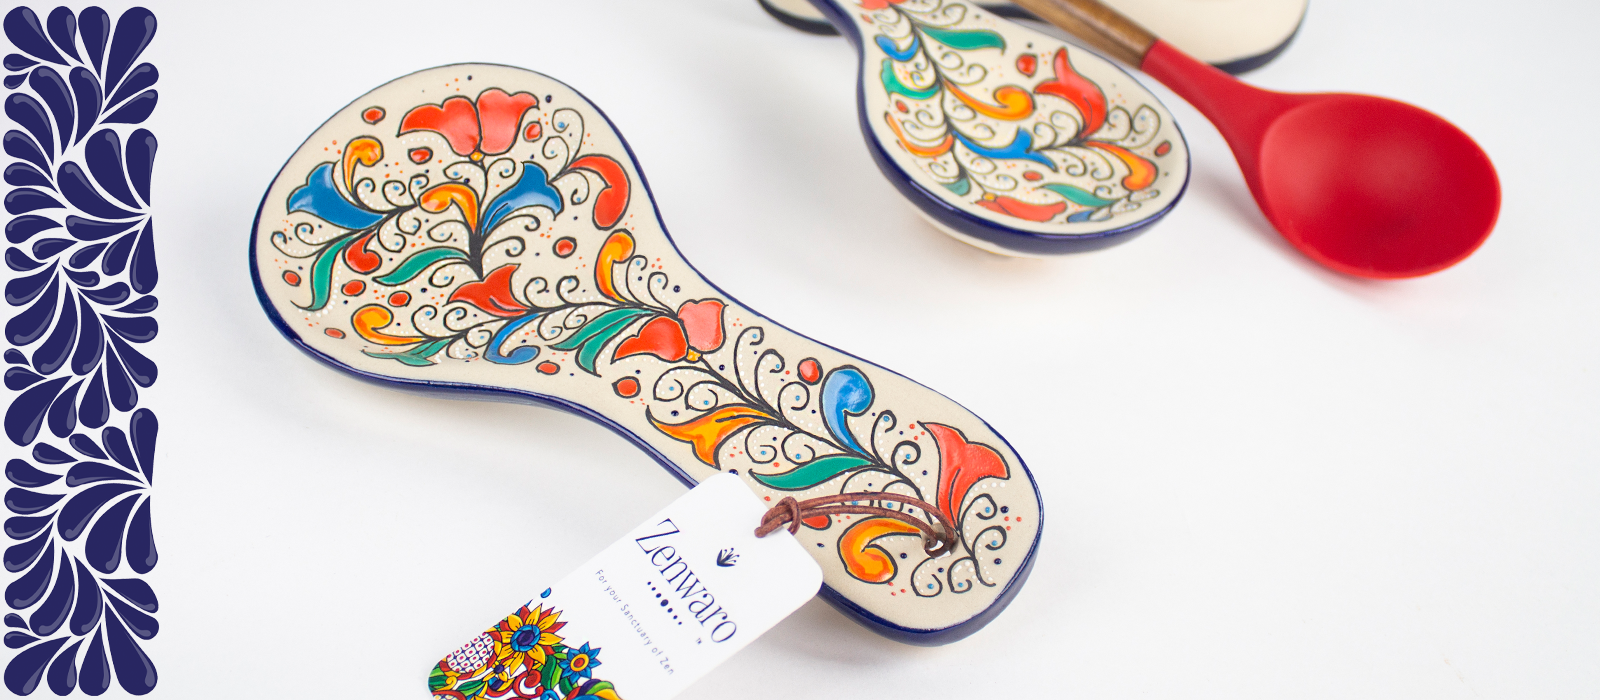 Kitchenware and Cookware, spatula rests handmade from ceramic and stoneware from Mexico